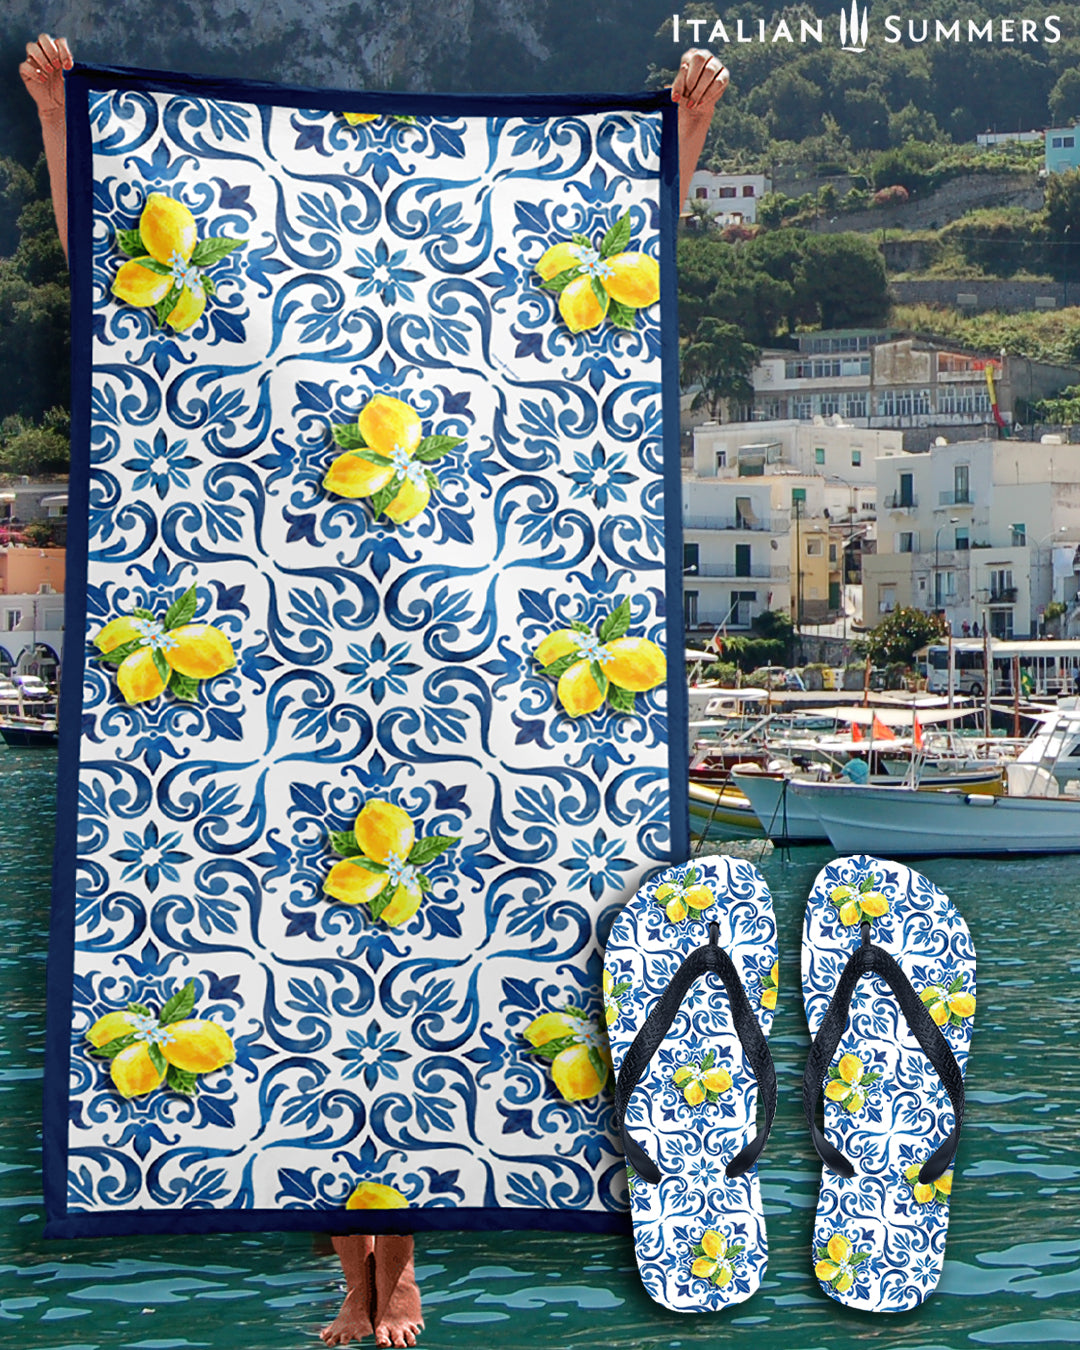 A beautiful Italy inspired beach towel printed with a pattern of blue Italian Maiolica tiles, a deep blue framing stripe and happy bunches of Sorrento lemons with flowers. Made by Italian Summers